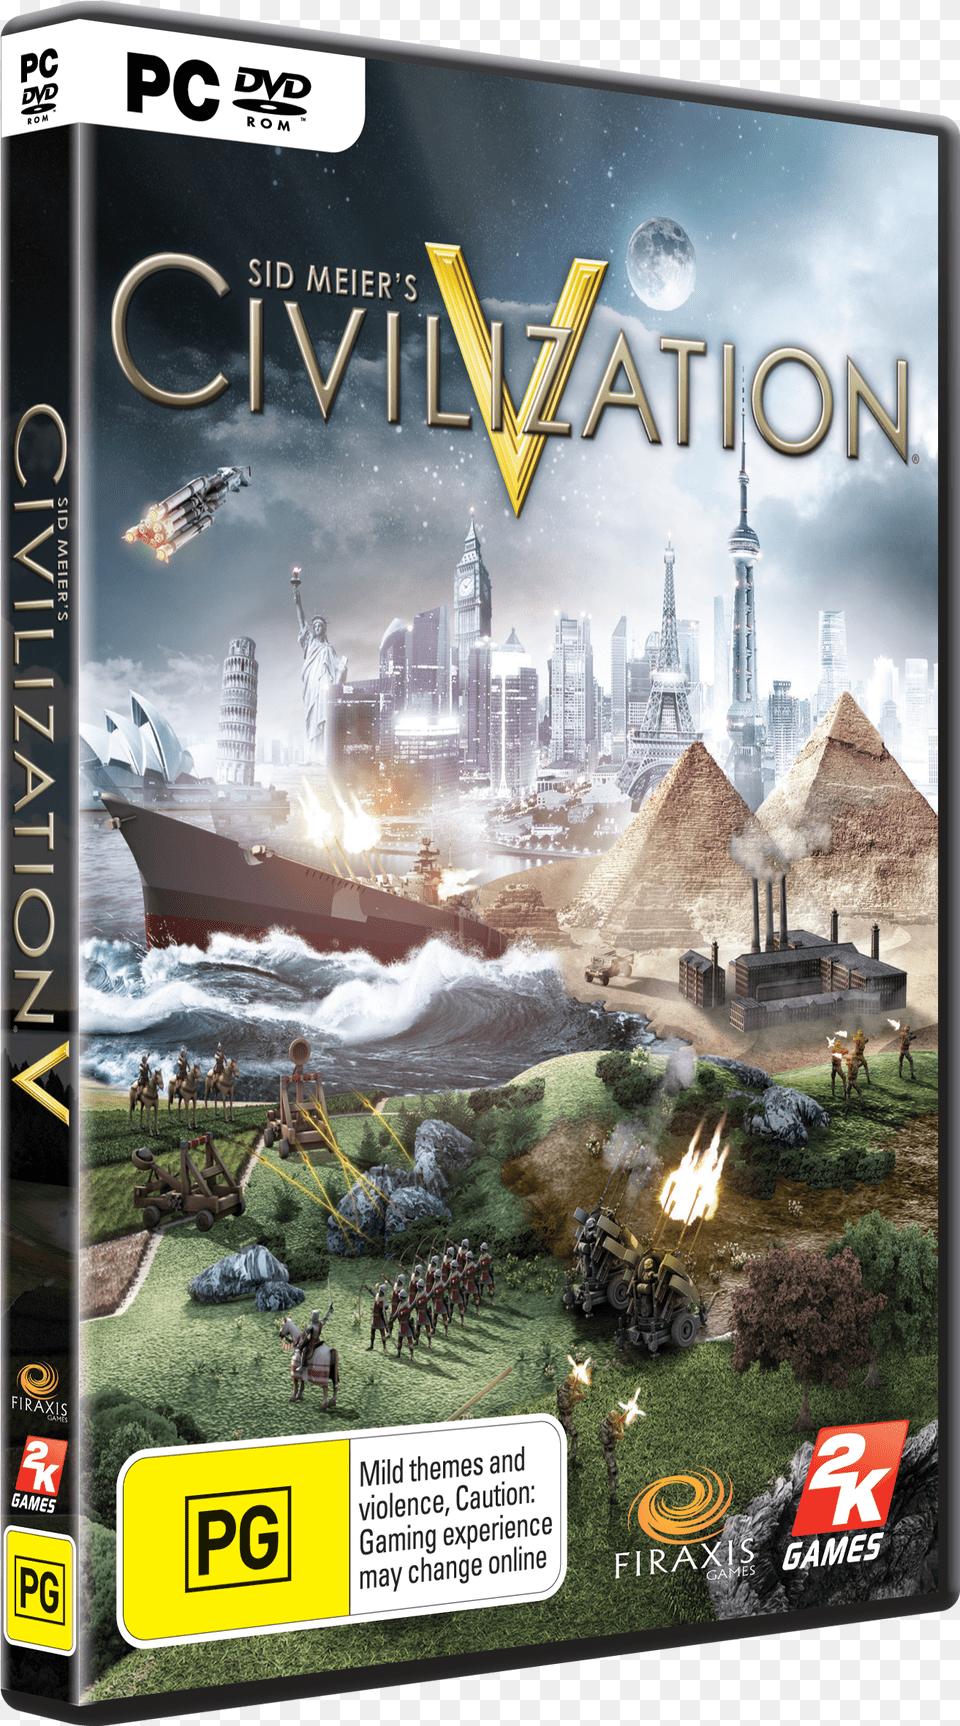 Who Wants A Copy Of Civilization V And Some Civ Gear Civilization V Package Free Transparent Png